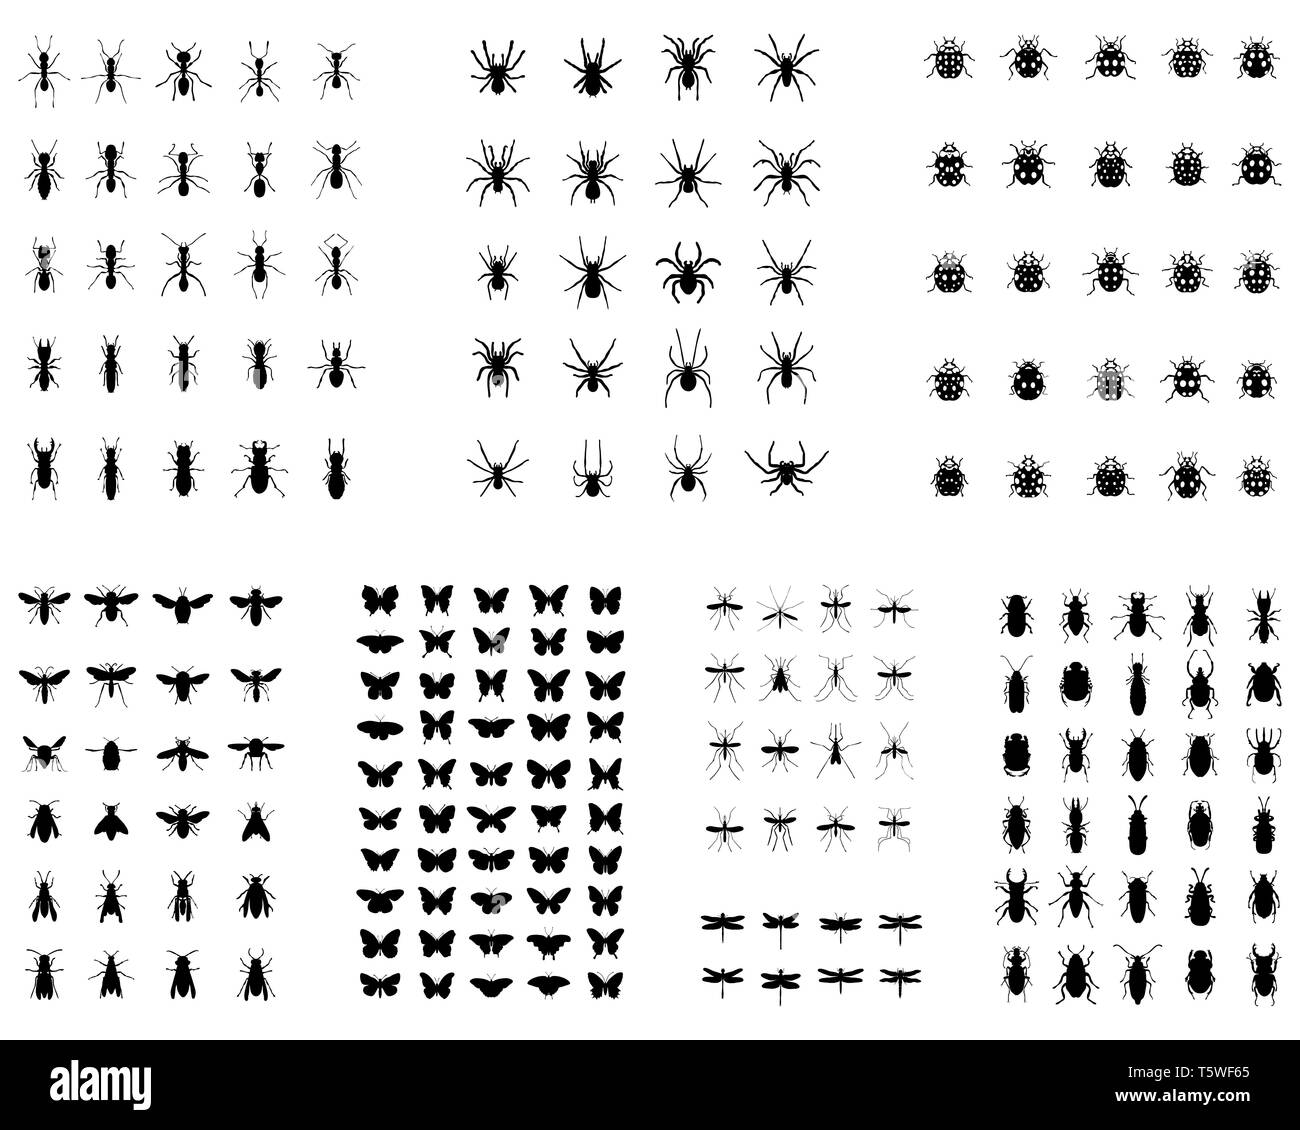 Black silhouettes of insects on white background Stock Photo